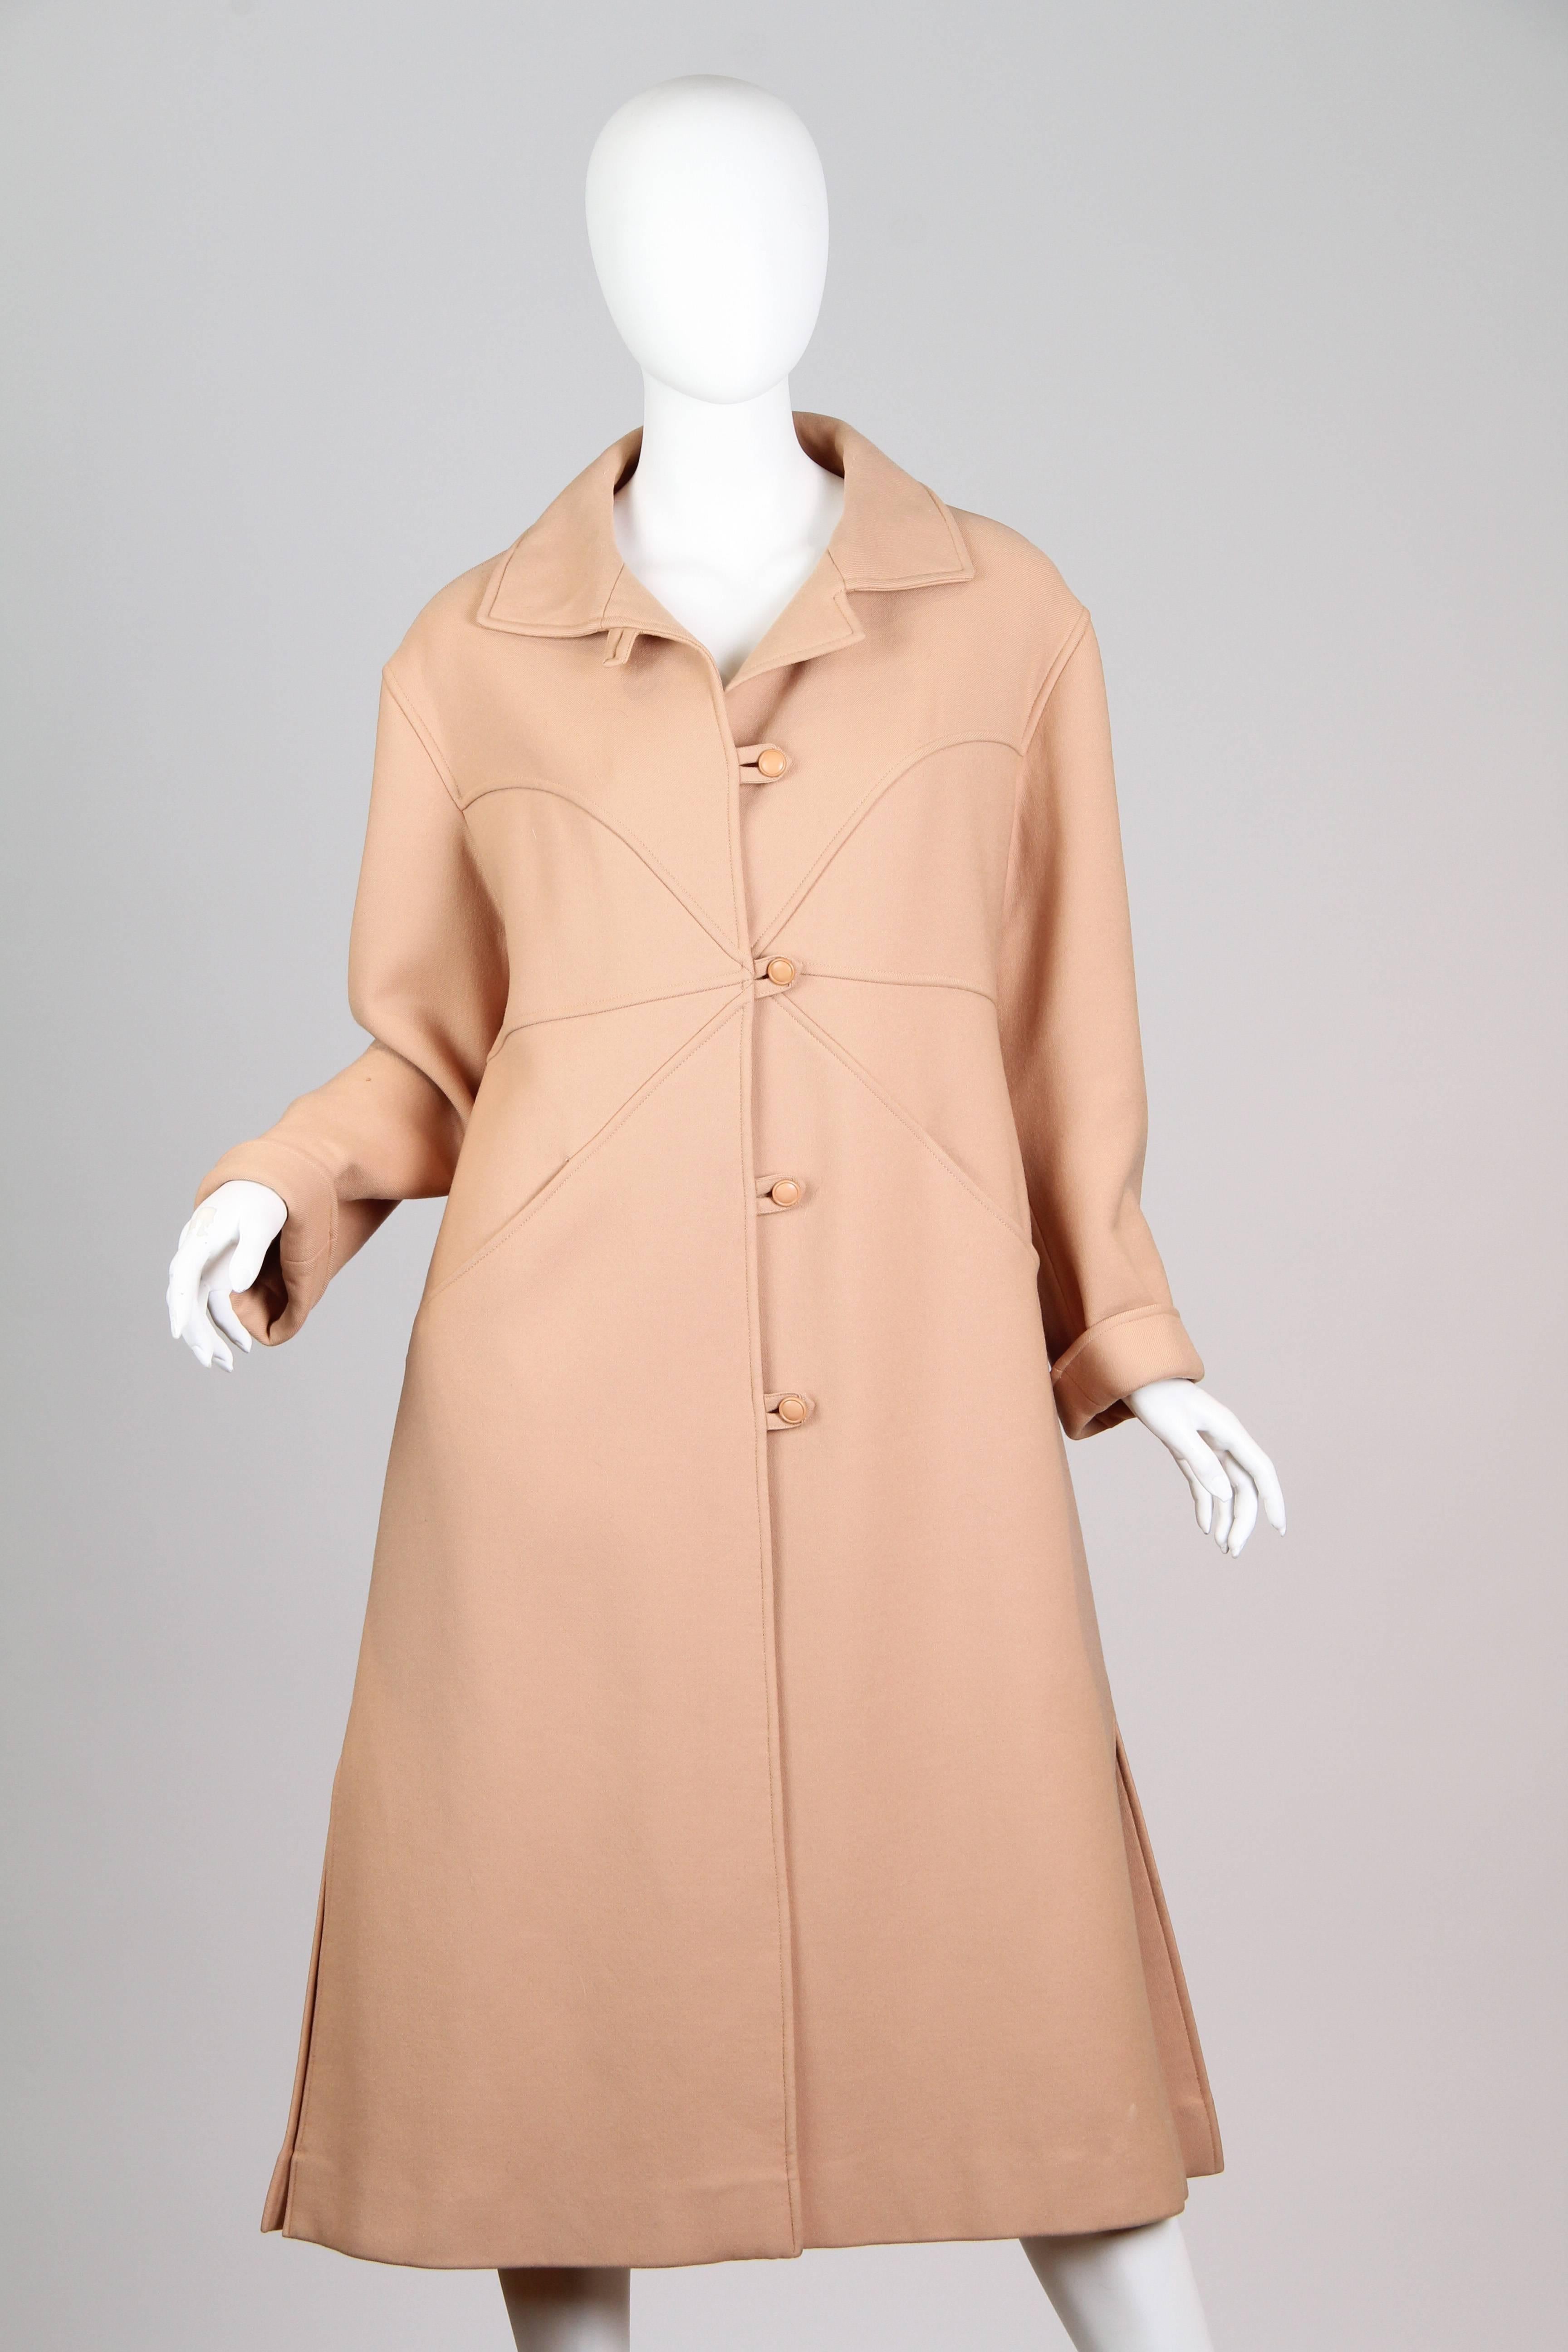 Gorgeous wool coat from Courréges  with great Mod styling and seaming details. Dating from the 1960s or early 1970s. 